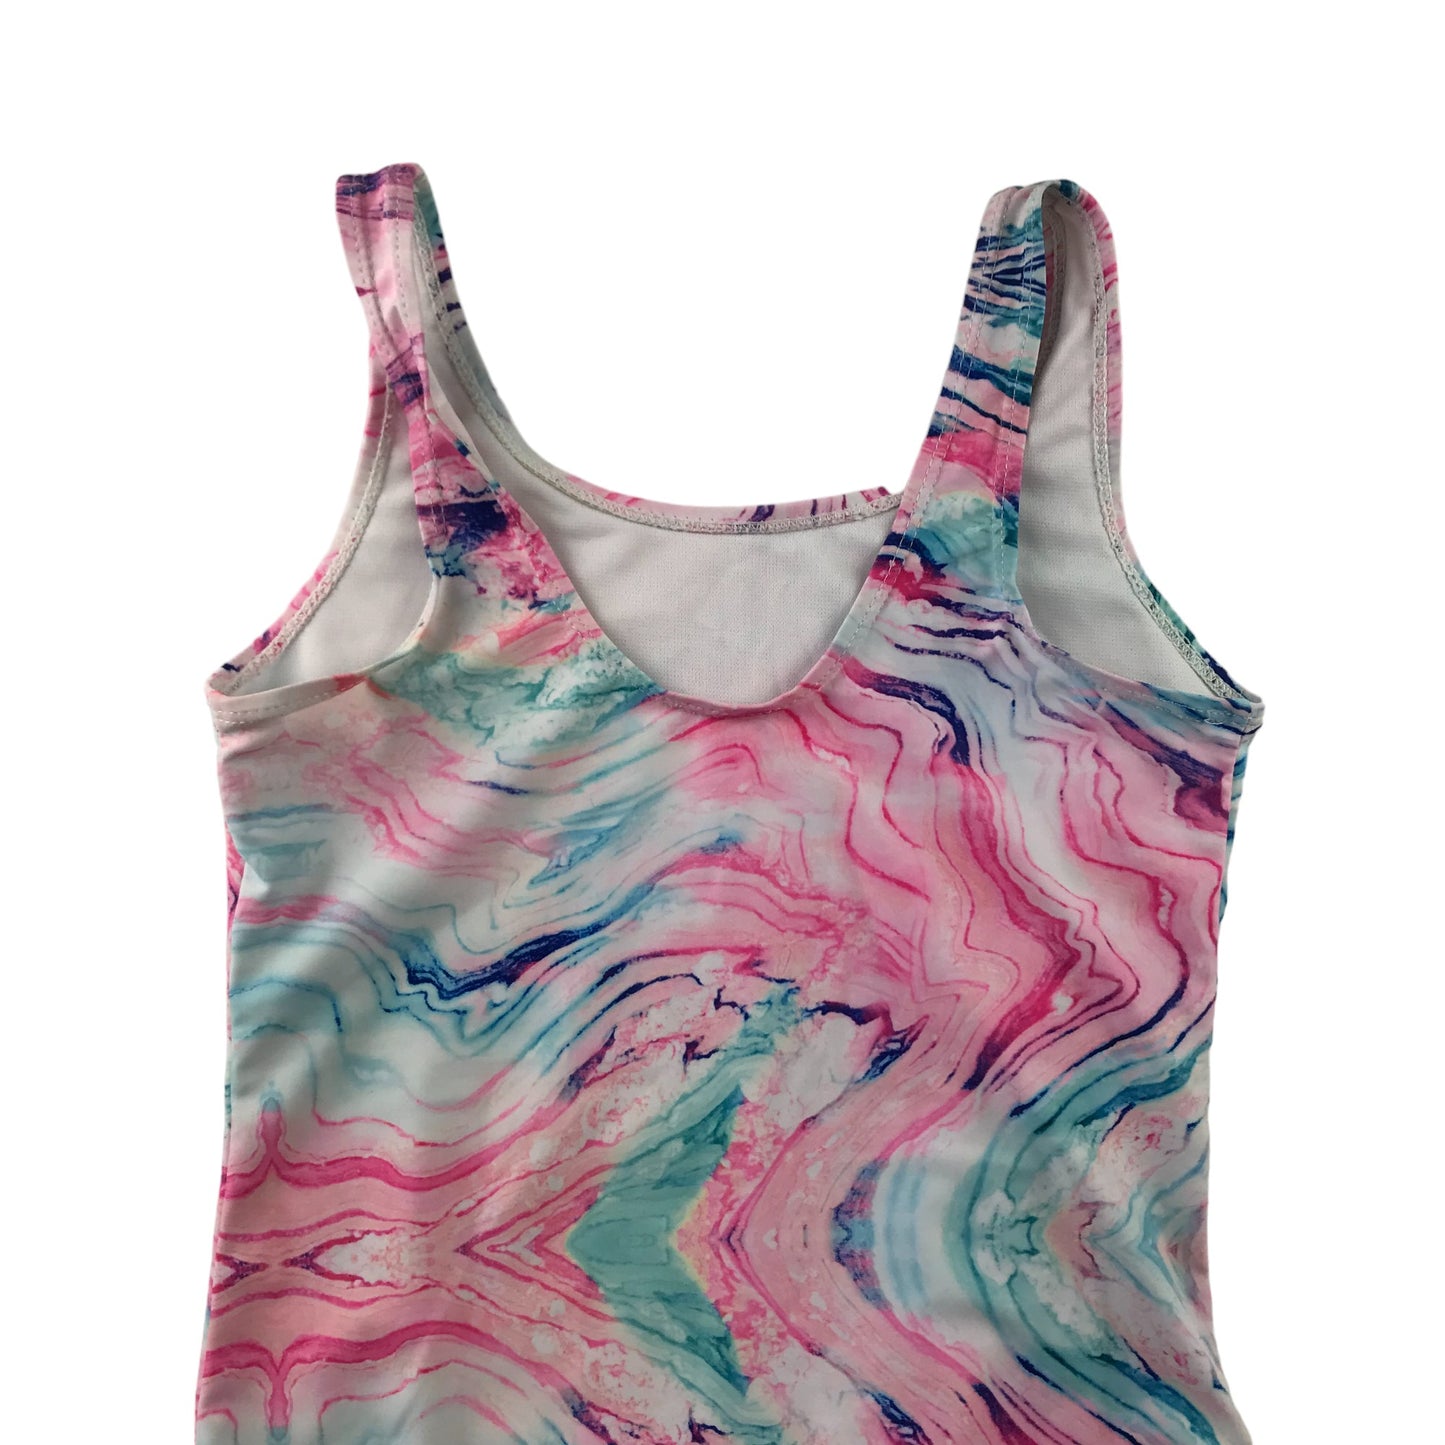 Primark Swimsuit Age 10 Pink and Blue Watercolour Unicorns Have More Fun One Piece Cossie